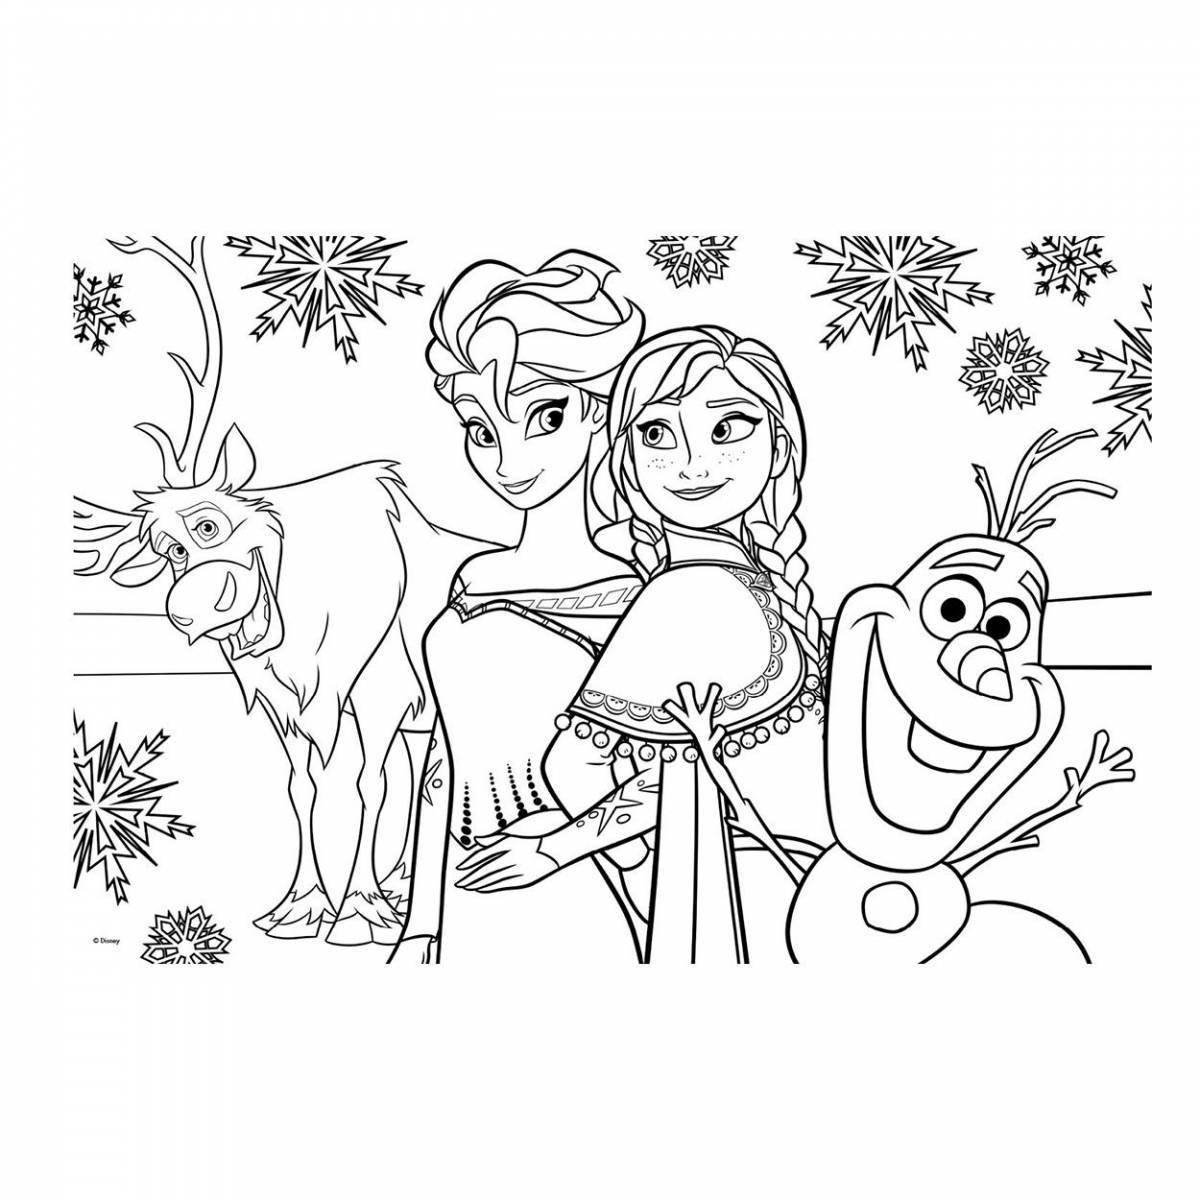 Exalted coloring elsa and anna frozen 2